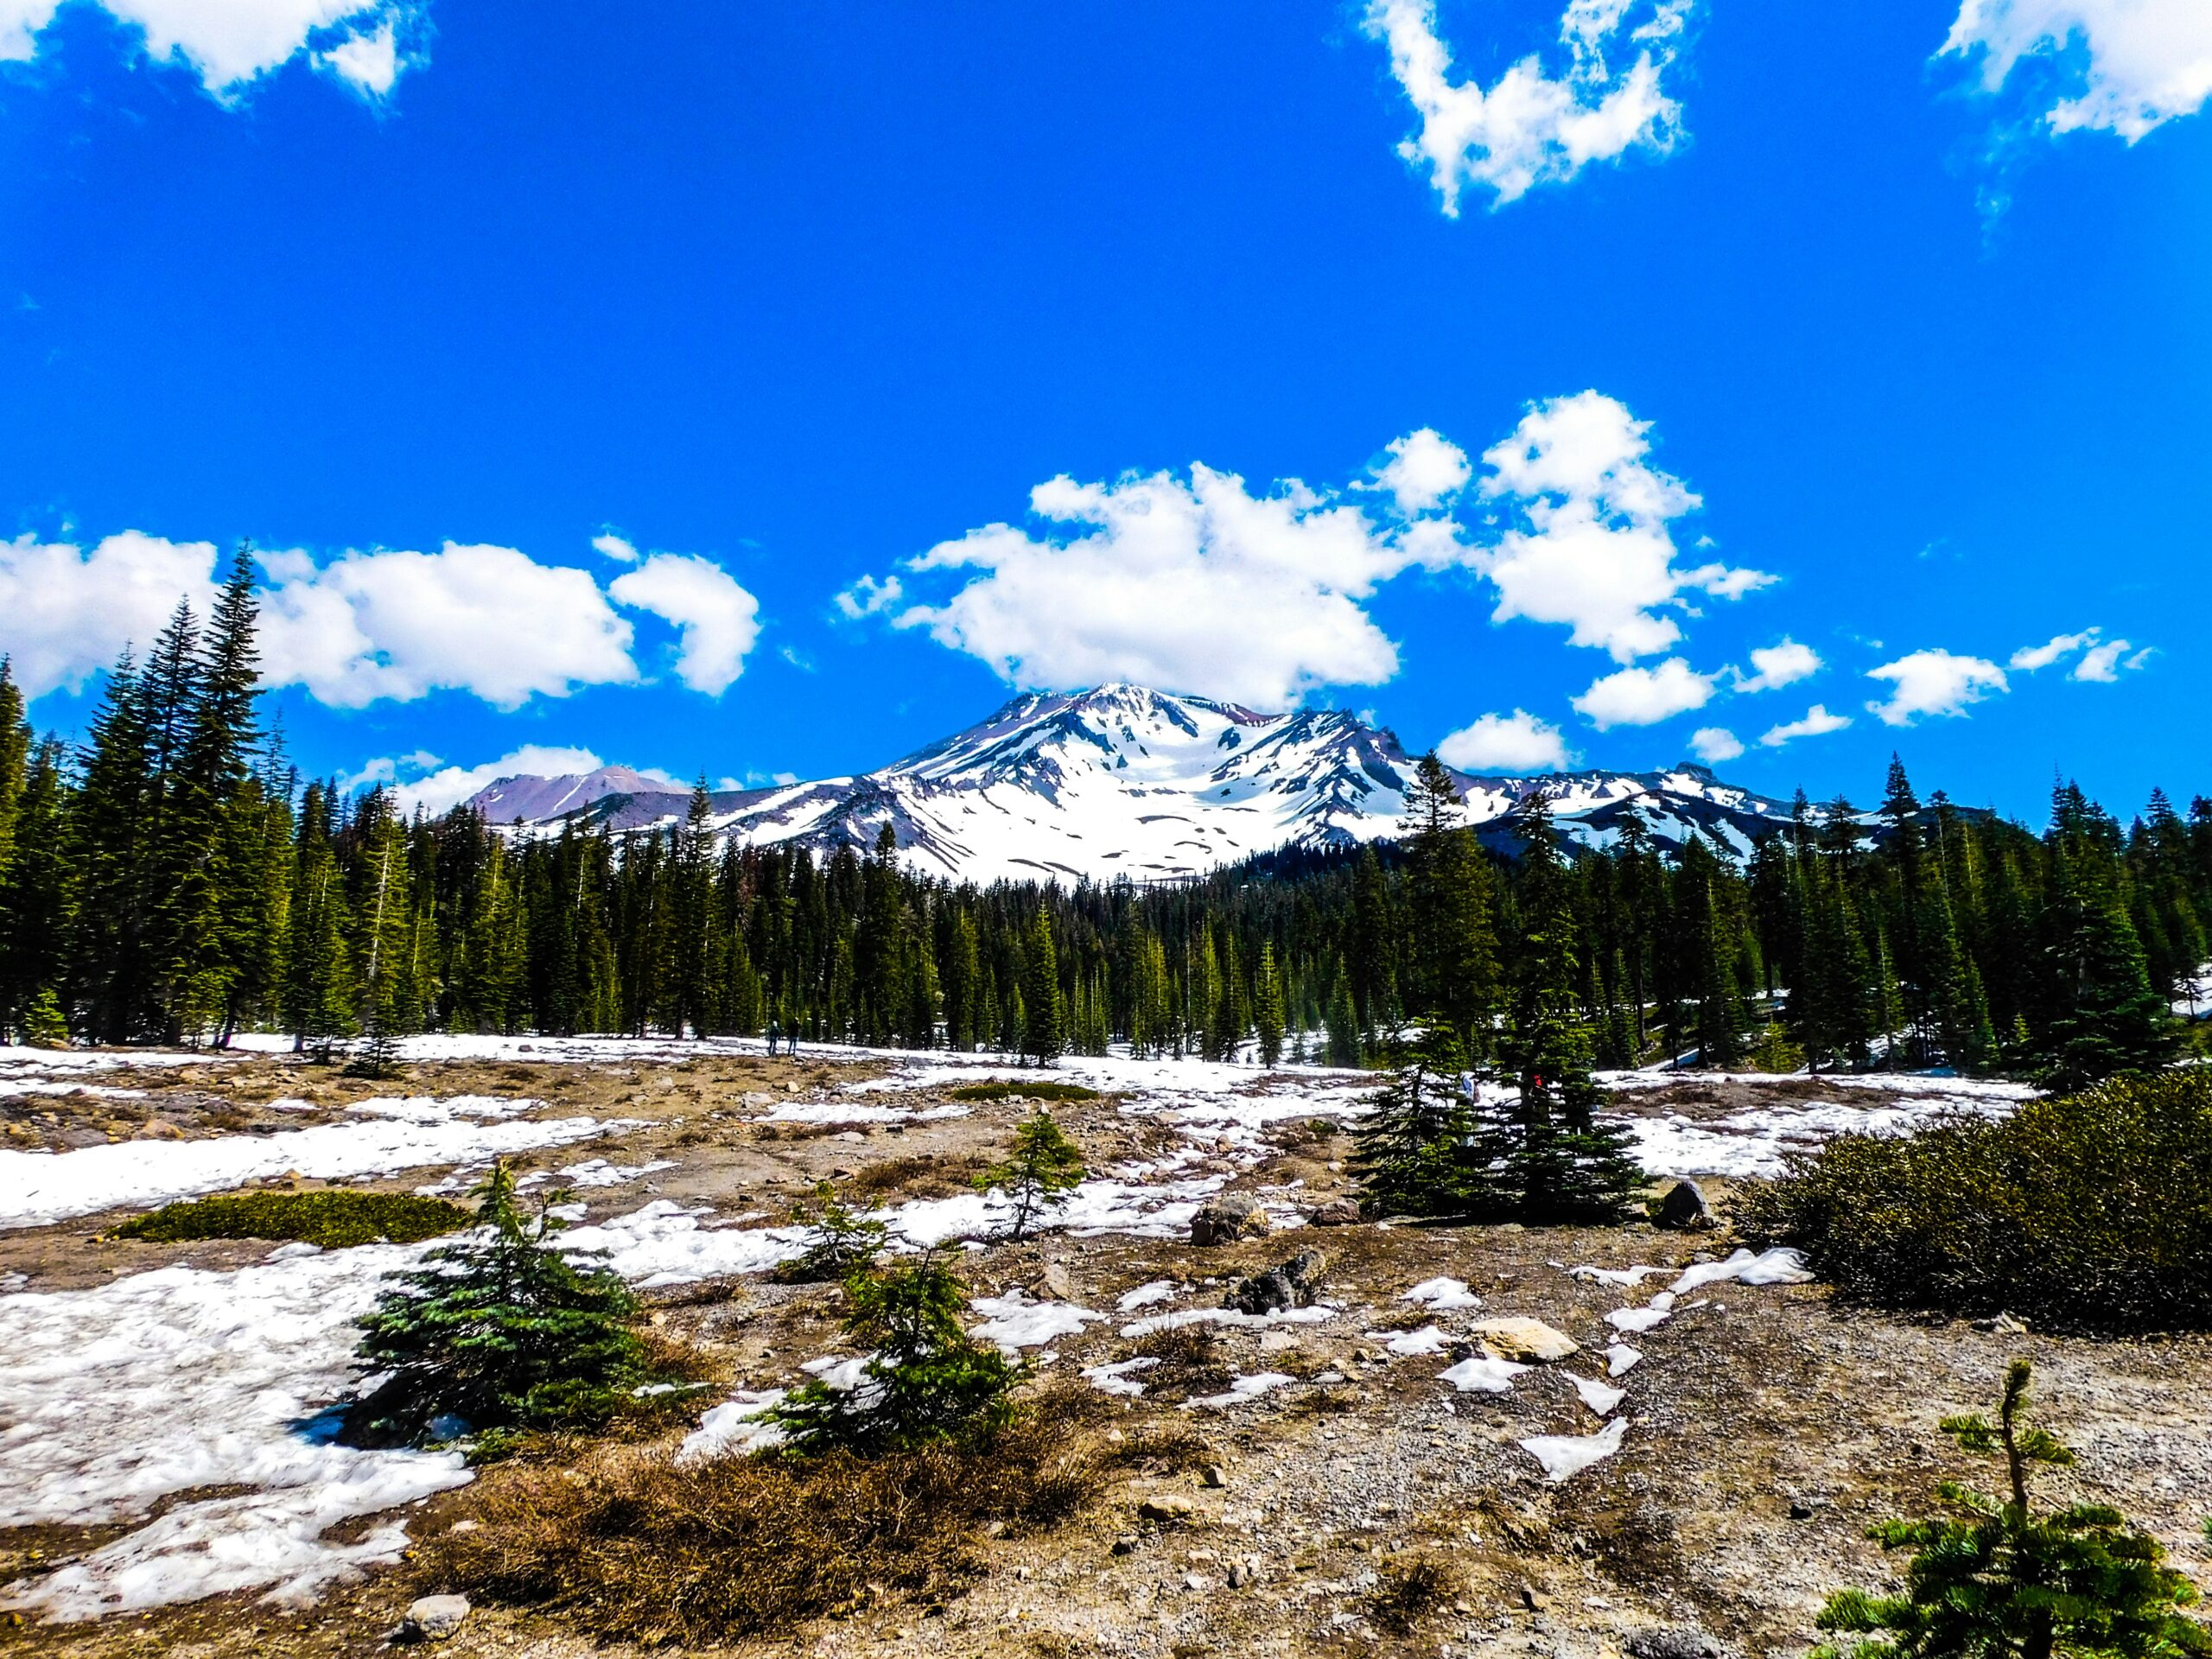 Has Anyone Died While Attempting To Climb Mount Shasta?